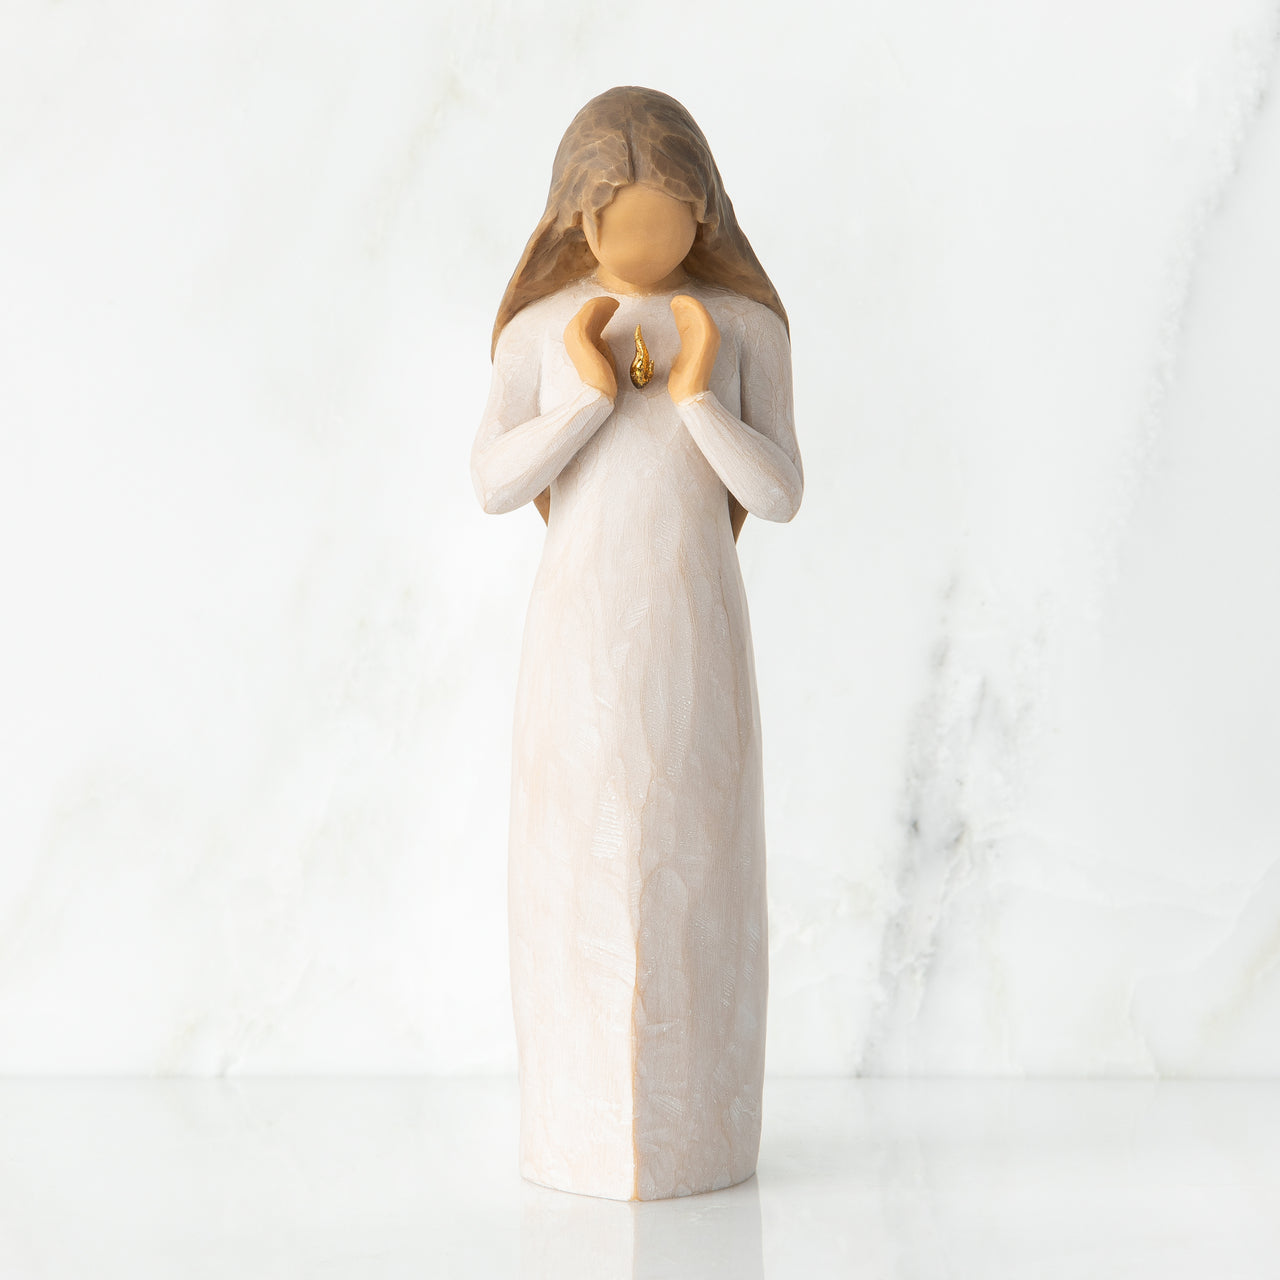 Ever Remember Willow Tree® Figurine Sculpted by Susan Lordi